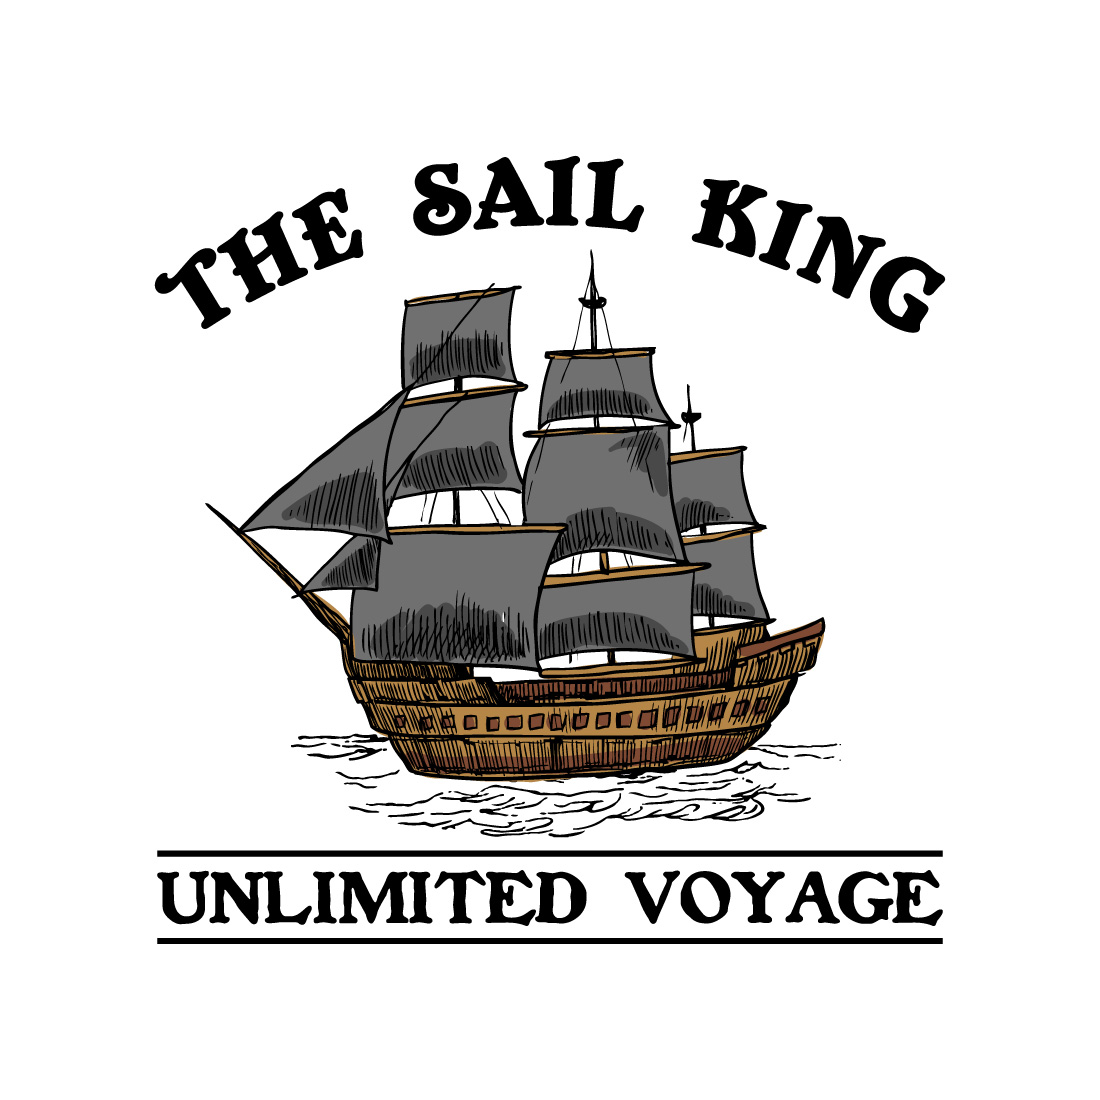 The sail king unlimited voyage tshirt design cover image.